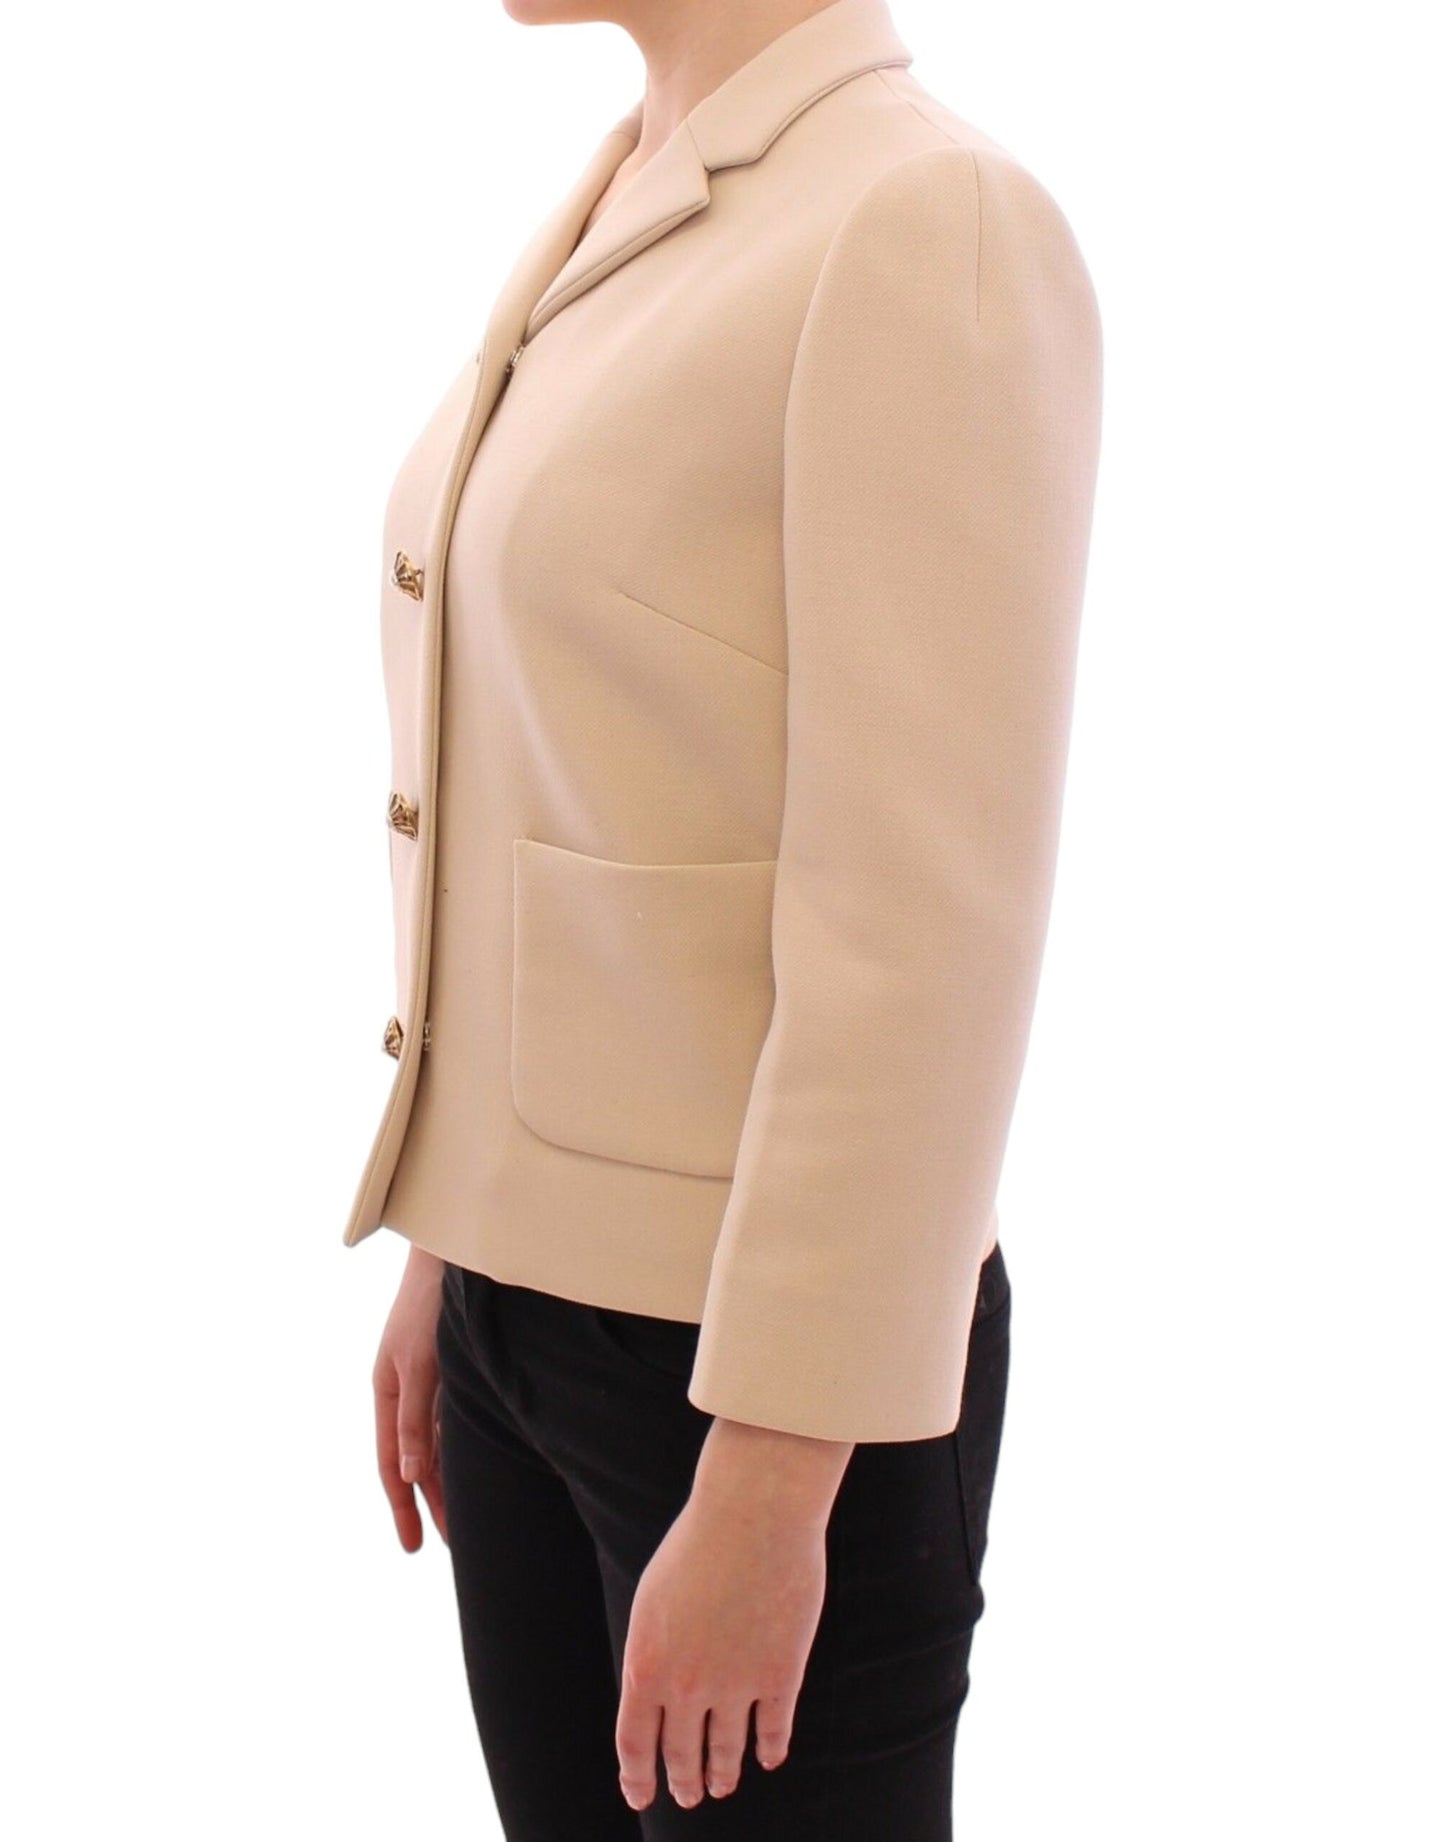 Elegant Beige Wool-Blend Jacket with Gold Accents